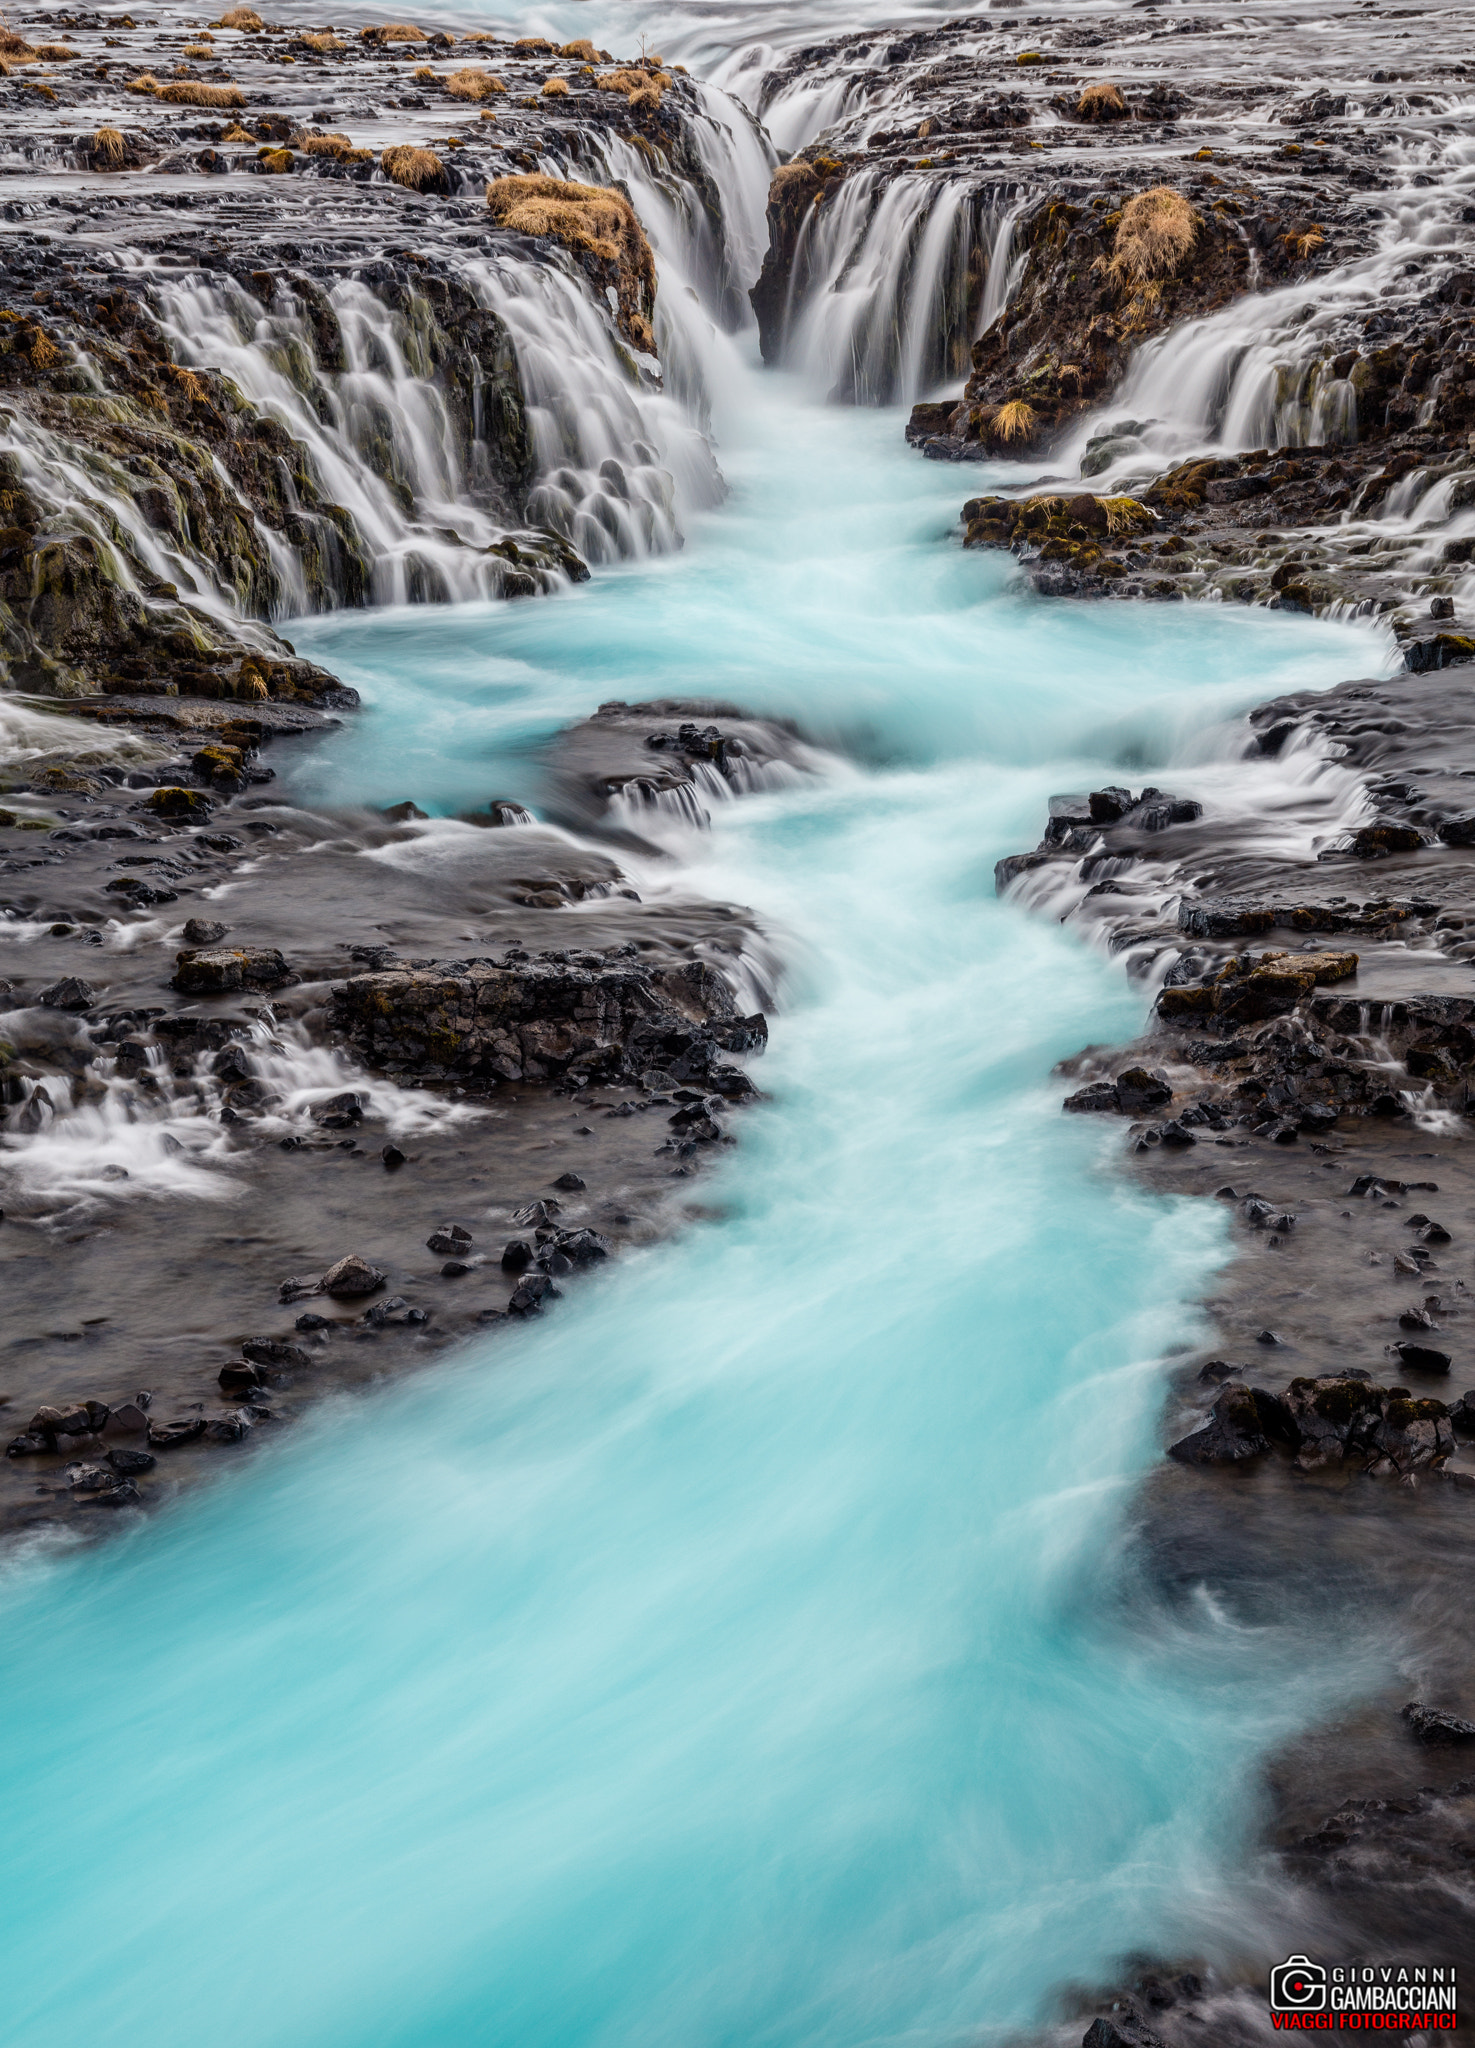 Canon EOS 5DS R + Sigma 24-105mm f/4 DG OS HSM | A sample photo. Bruarfoss _ iceland 2016 photography